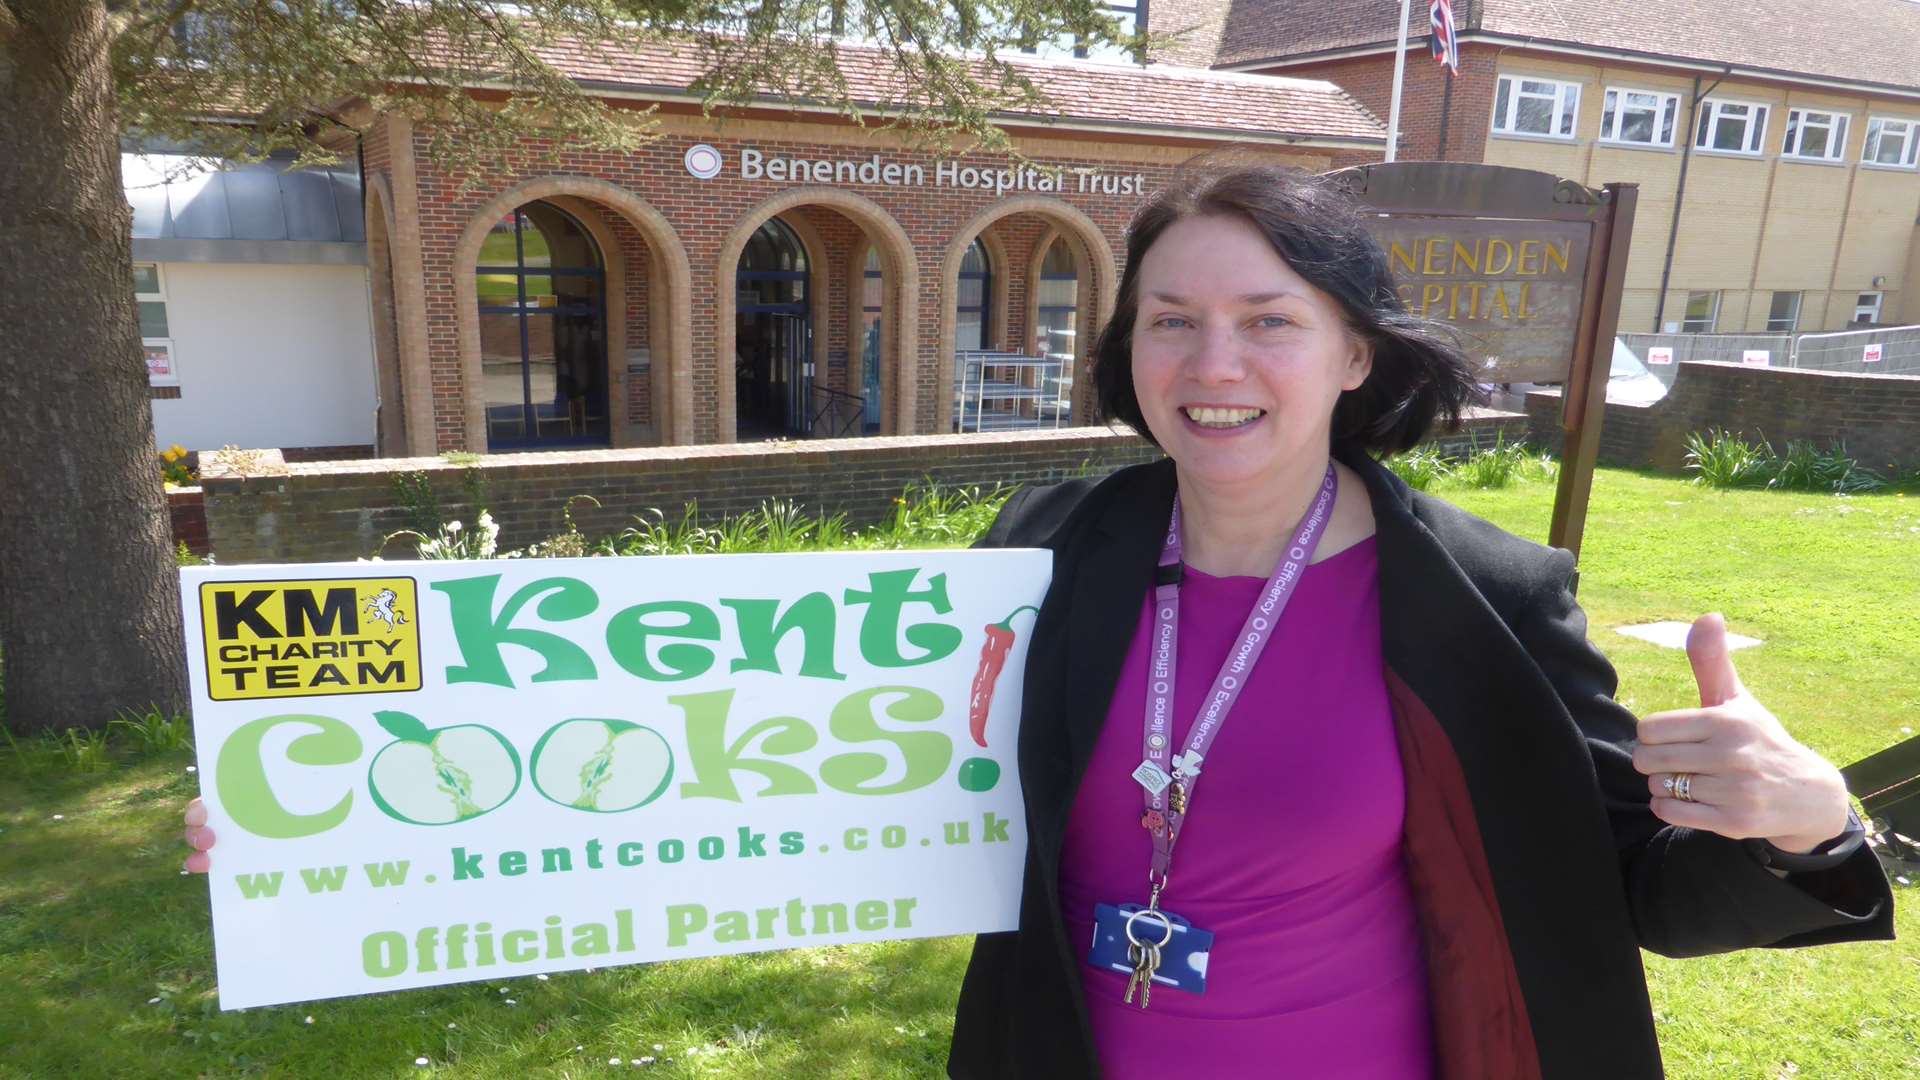 Jane Abbott, Hospital Director at Benenden Hospital Trust, announces her support for the county's official school cookery contest Kent Cooks which is now open for nominations.